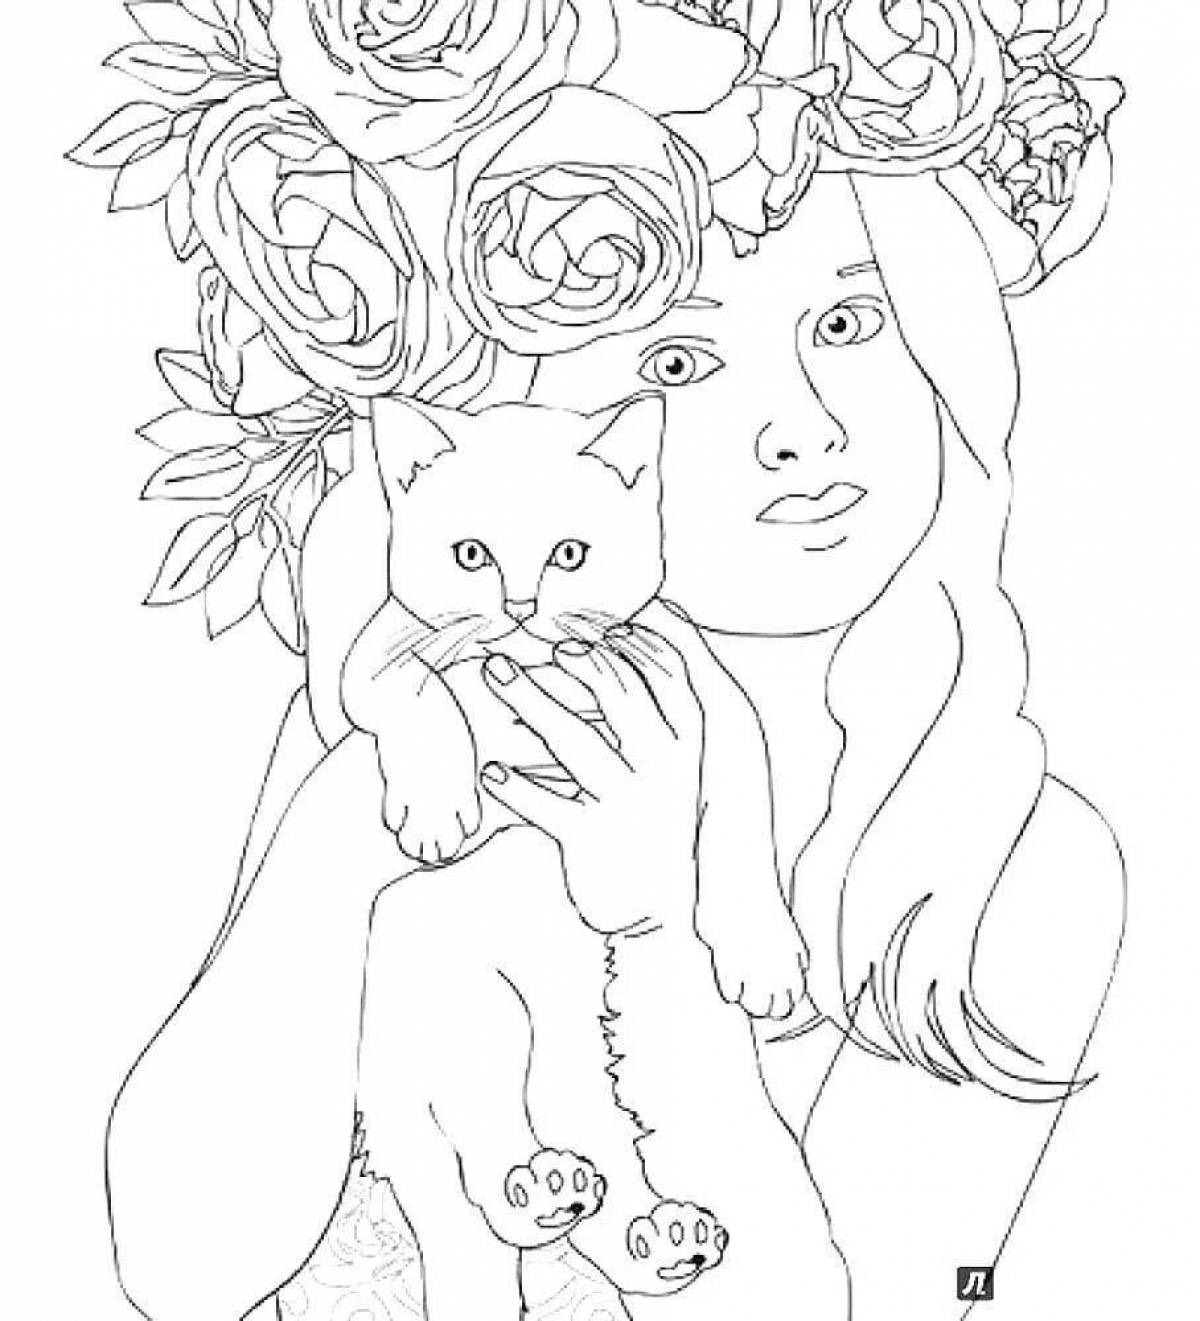 Soulful cat therapy anti-stress coloring book